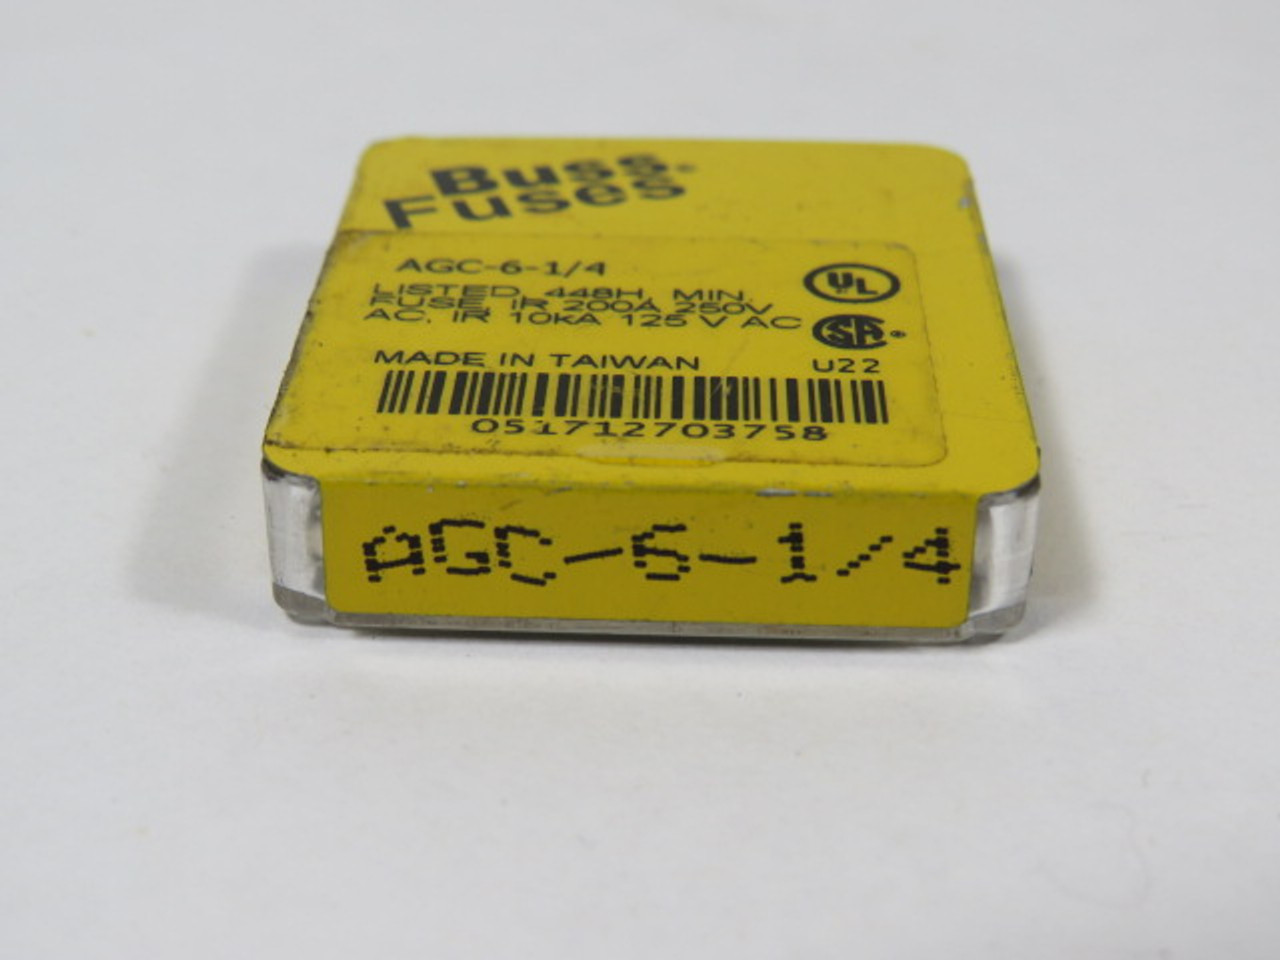 Bussmann AGC-6-1/4 Fast-Acting Glass Fuse 6-1/4A 250V 5-Pack ! NEW !